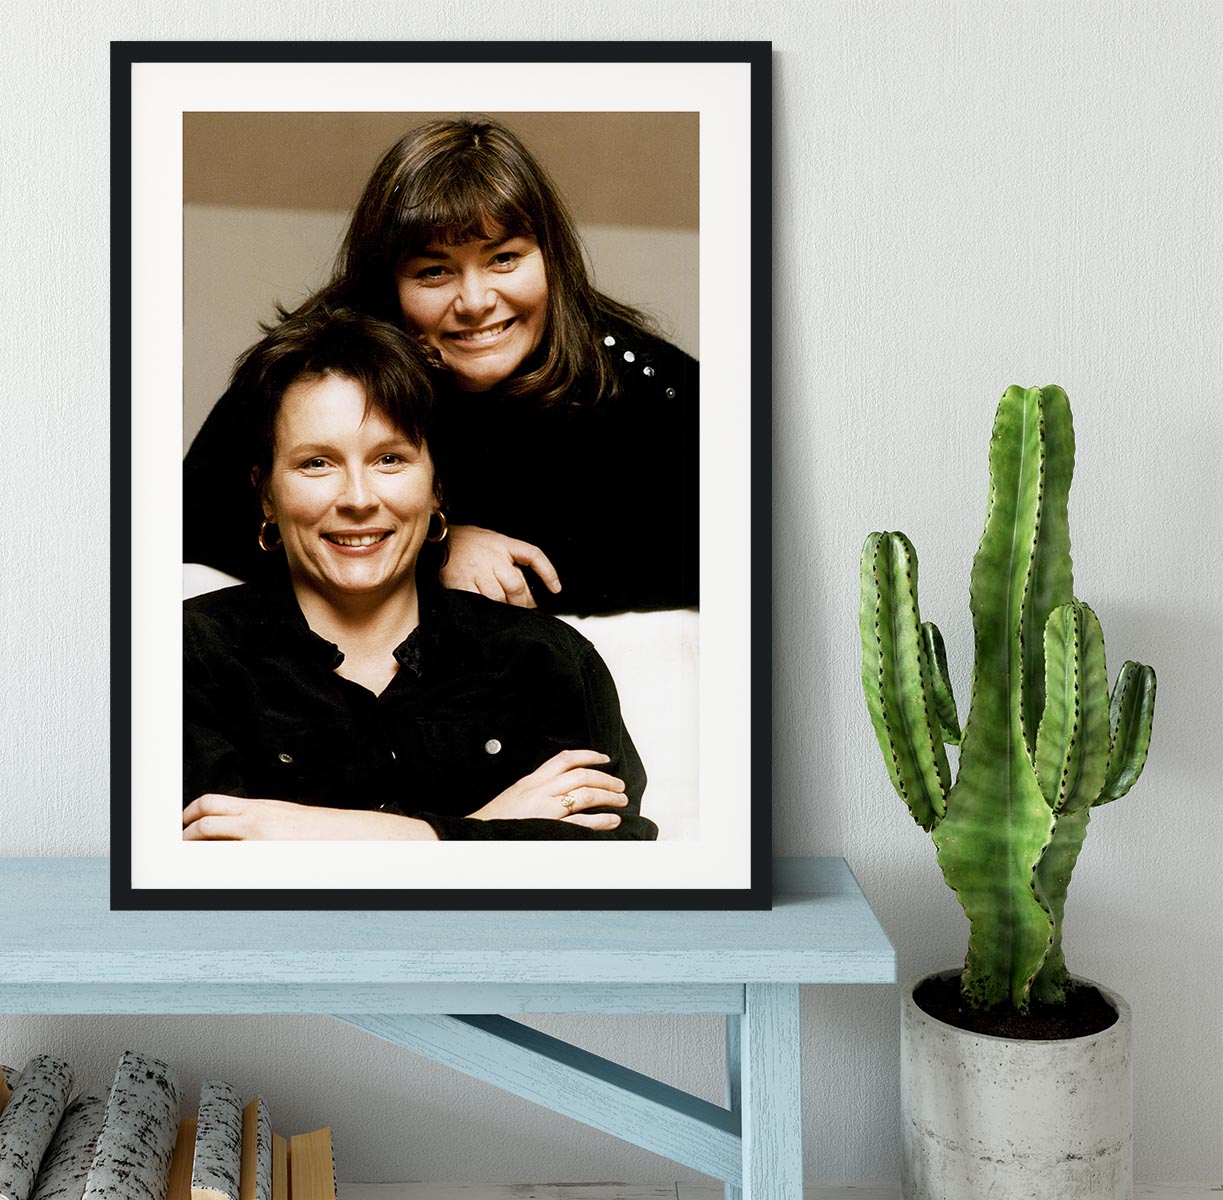 French and Saunders Framed Print - Canvas Art Rocks - 1